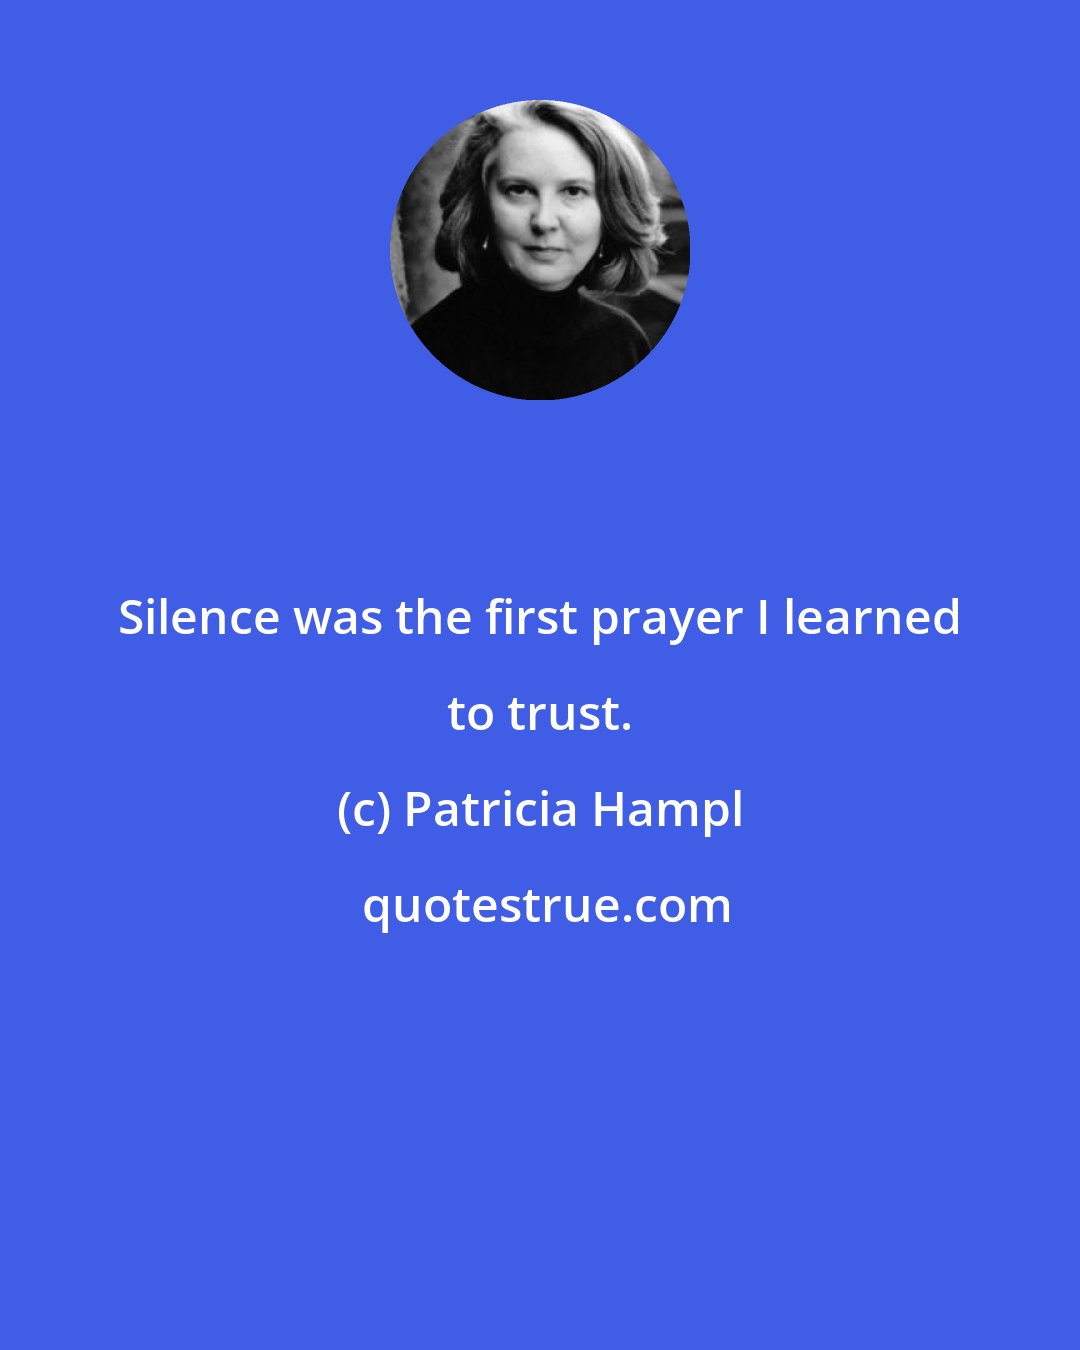 Patricia Hampl: Silence was the first prayer I learned to trust.